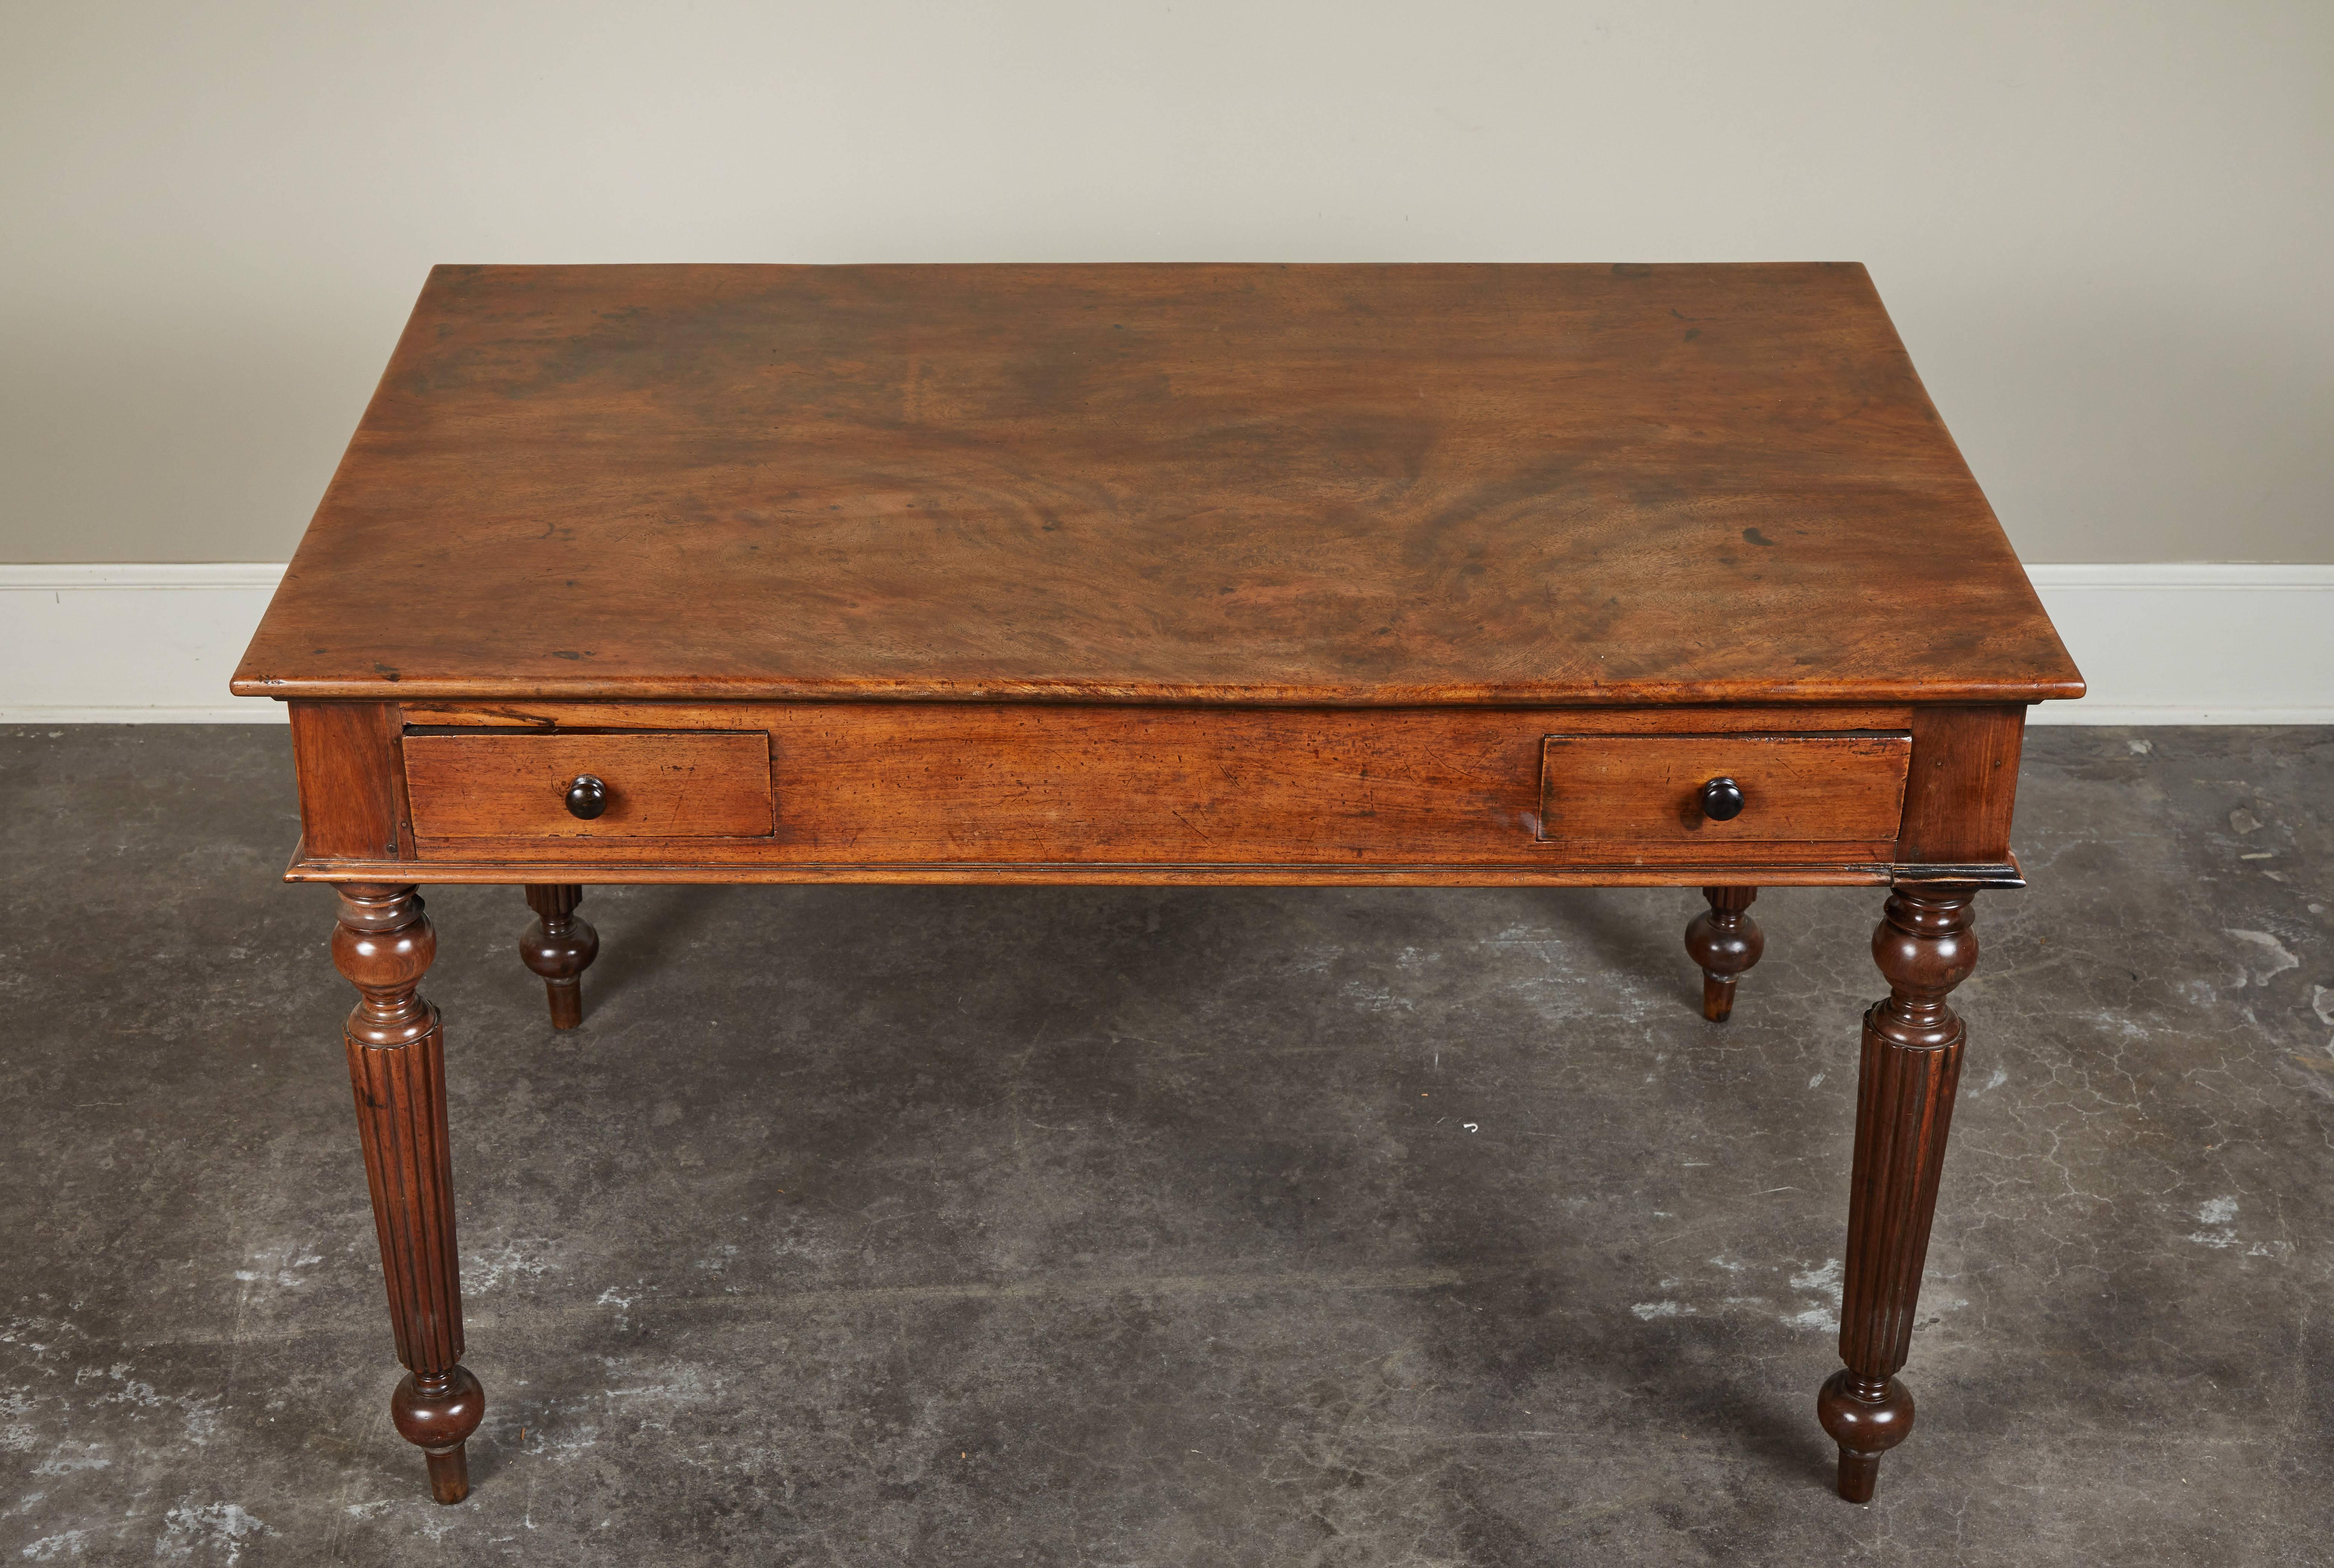 A great petite French Colonial rosewood desk. Top is one single piece of rosewood, with two small drawers on simple reeded and turned legs. Timeless and functional.